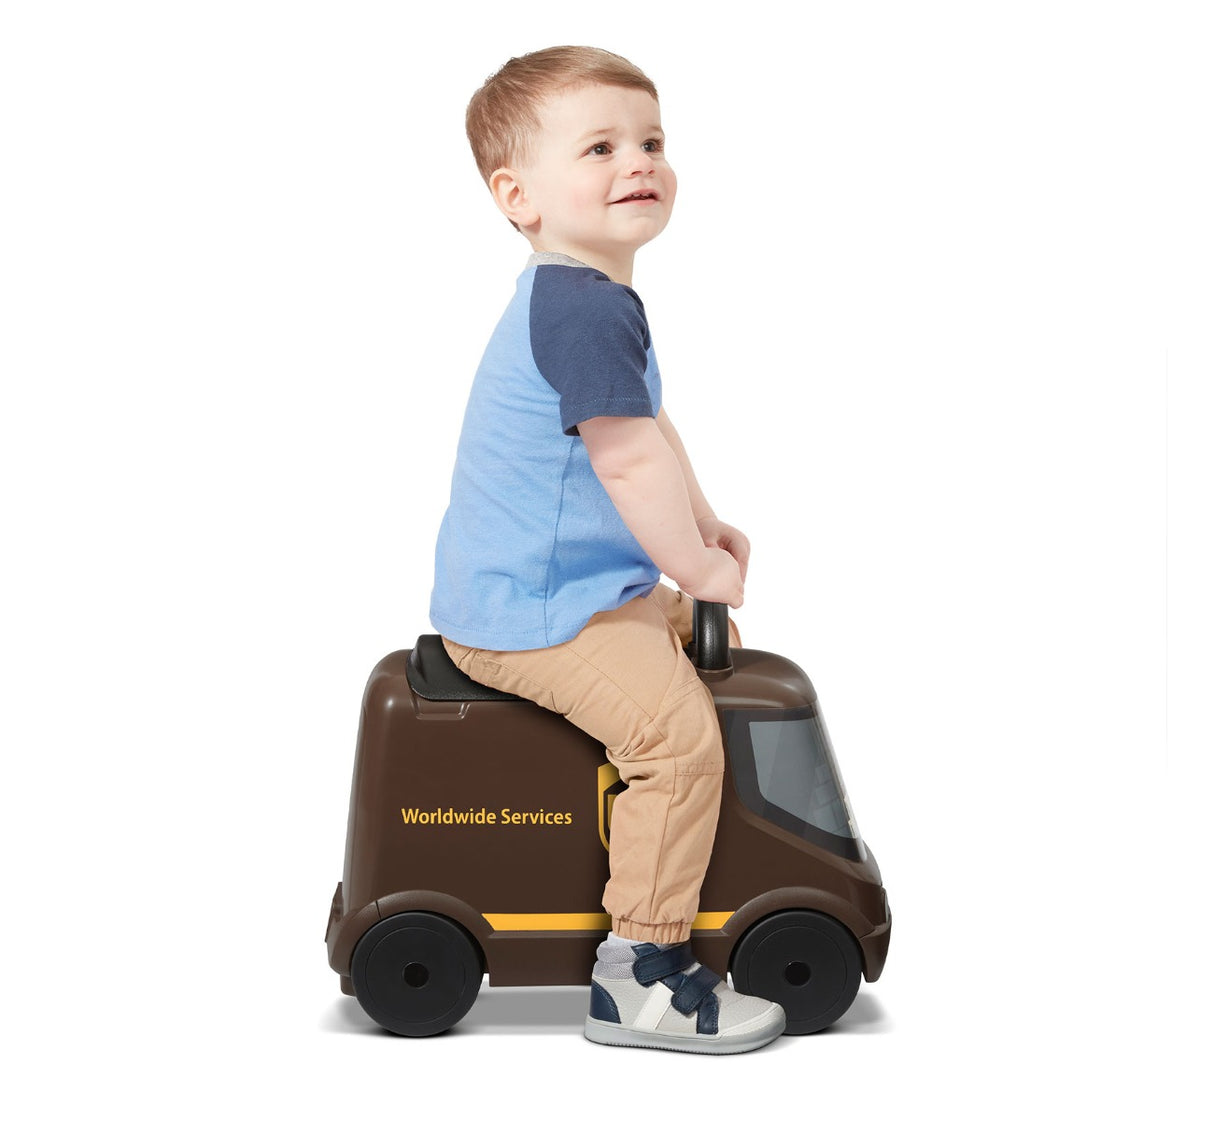 scoot and ride on the Ride & Deliver UPS Truck